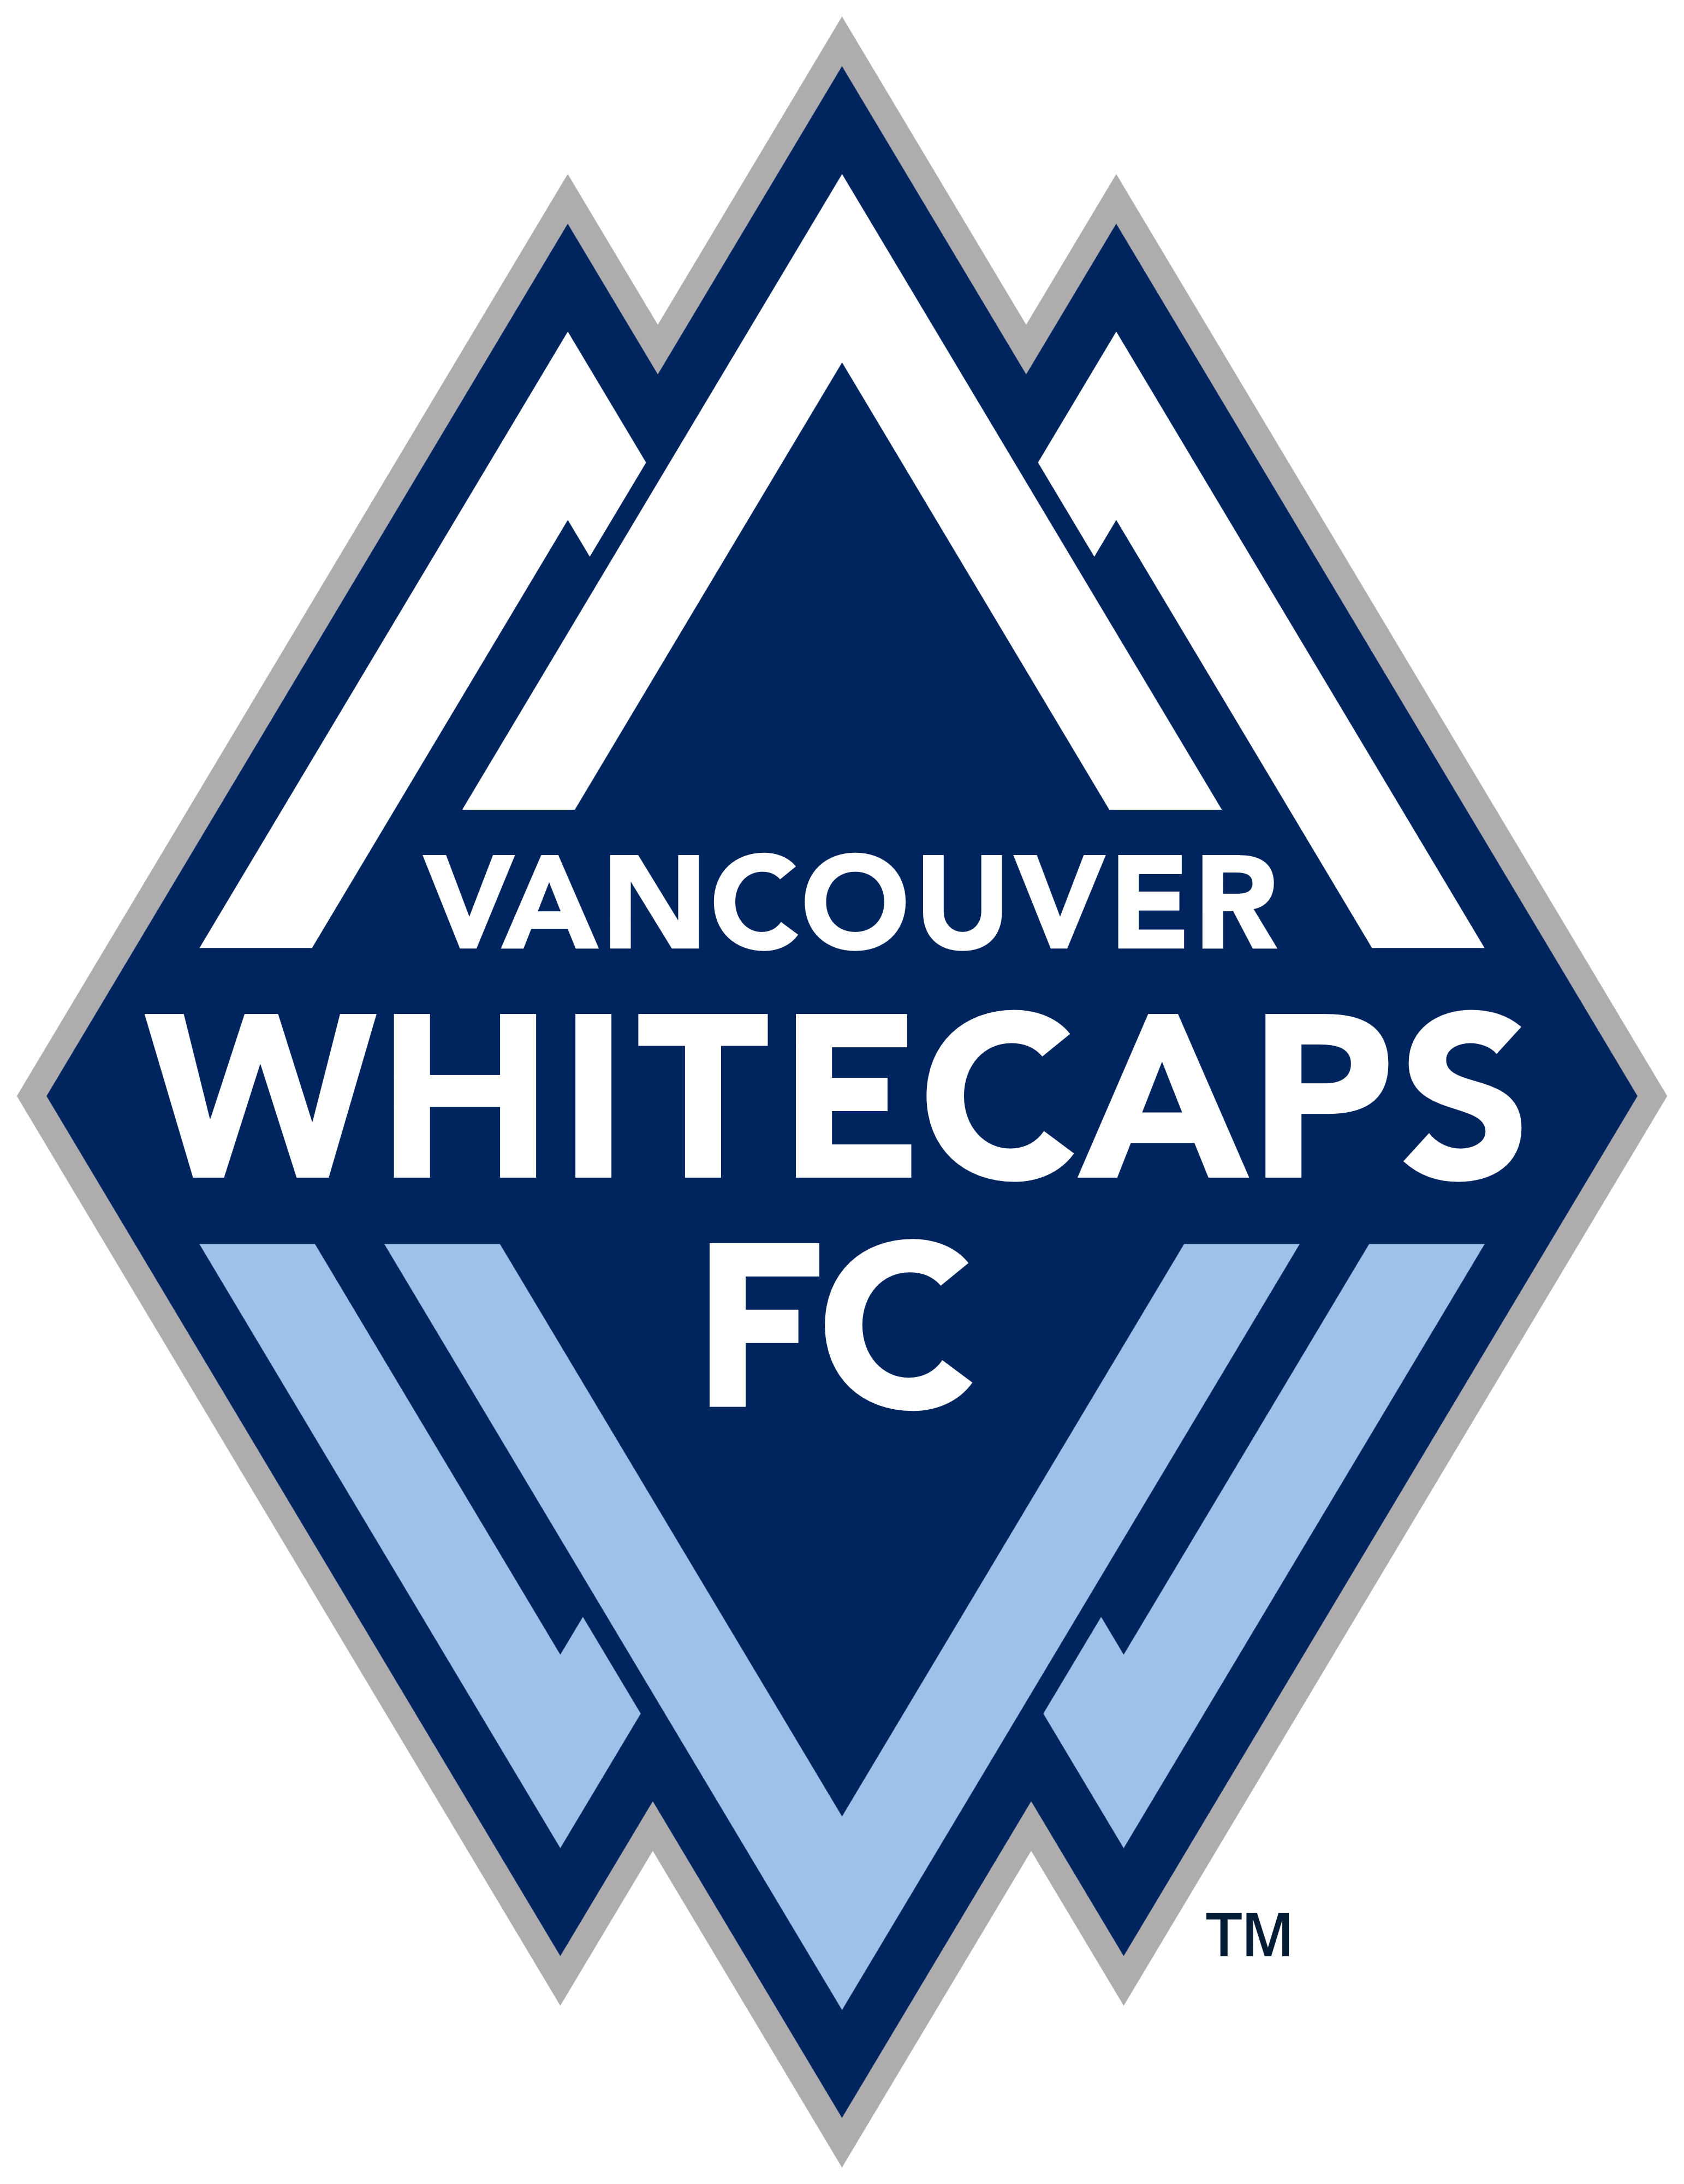 Vancouver Whitecaps Fc PNG - 111394